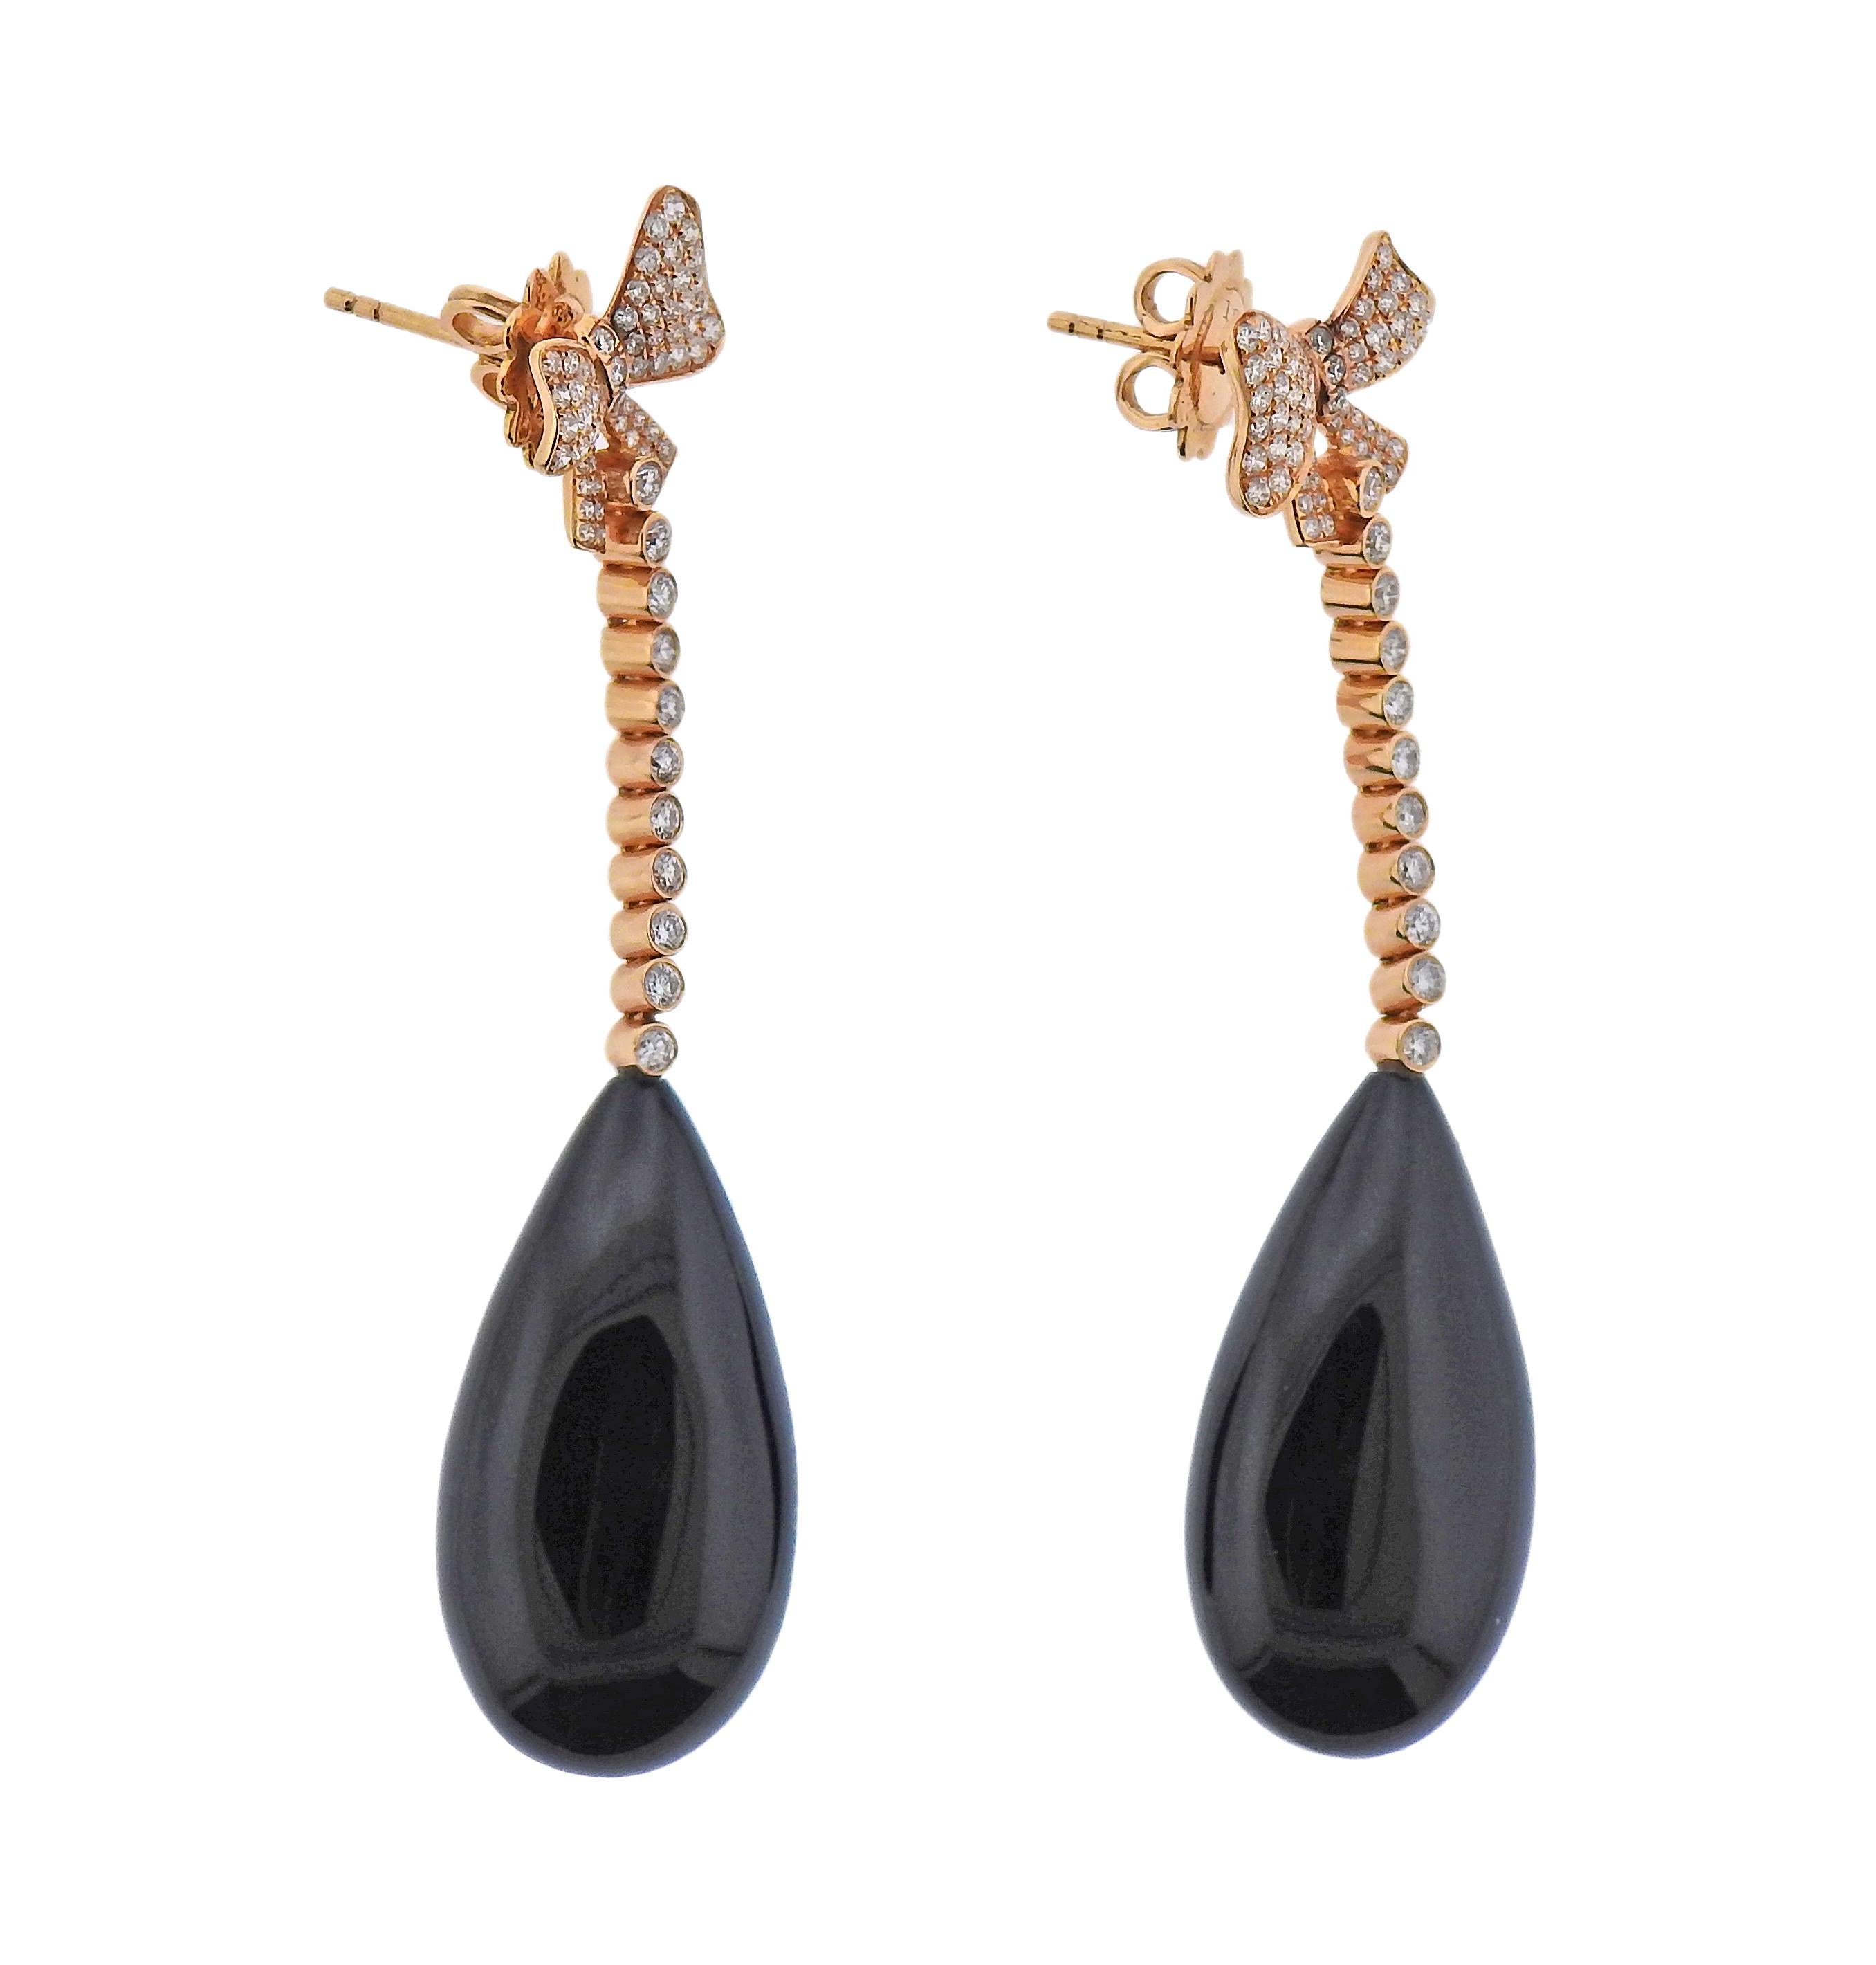 Pair of 18k rose gold drop earrings with bows. Set with teardrop onyx and approx. 0.80ctw in diamonds. Earrings are 62mm long. Marked 18k. Weight - 15.9 grams.